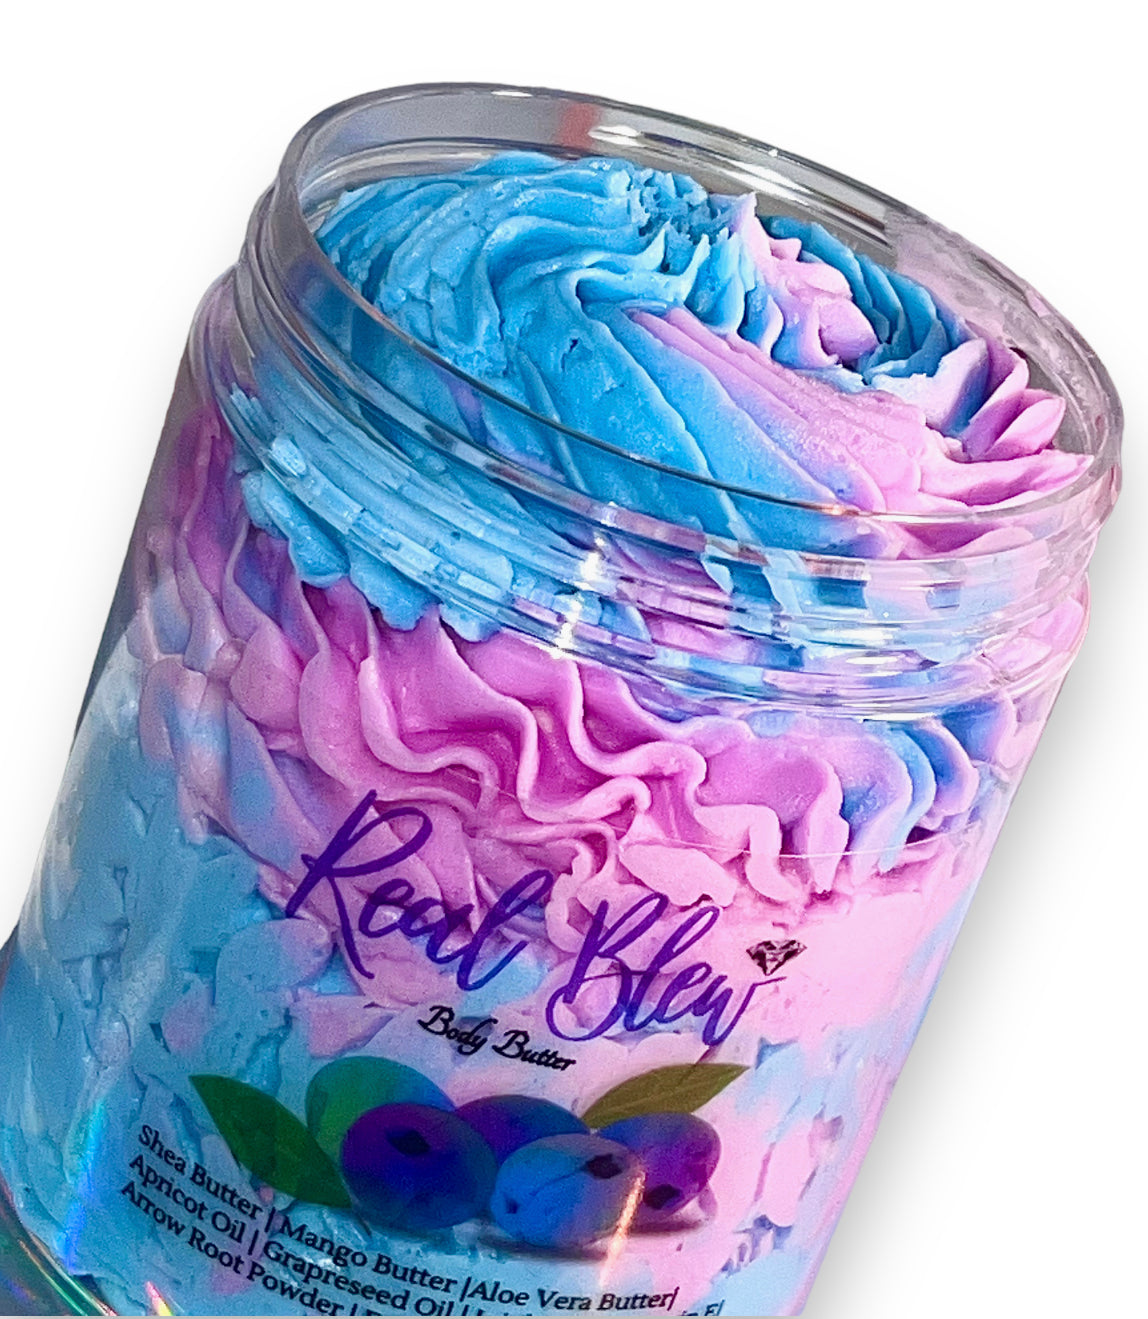 8oz Clear Jar of triple whipped body butter moisturizers in purple and blue, suitable for all skin types, showcasing it's  luxurious texture and vibrant colors.